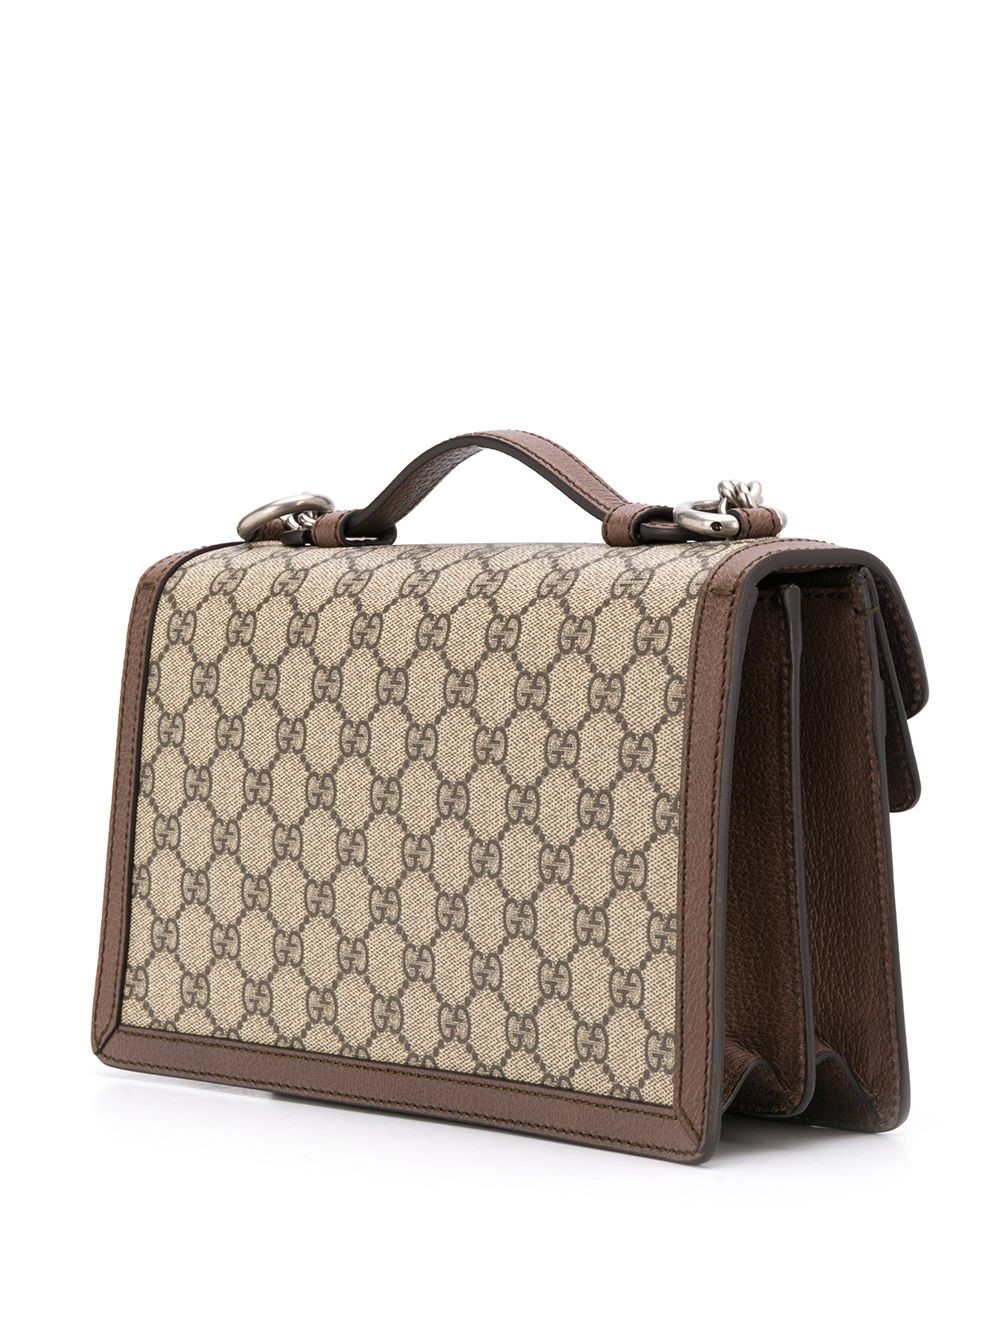 gucci DIONYSUS BAG available on 0 - 33745